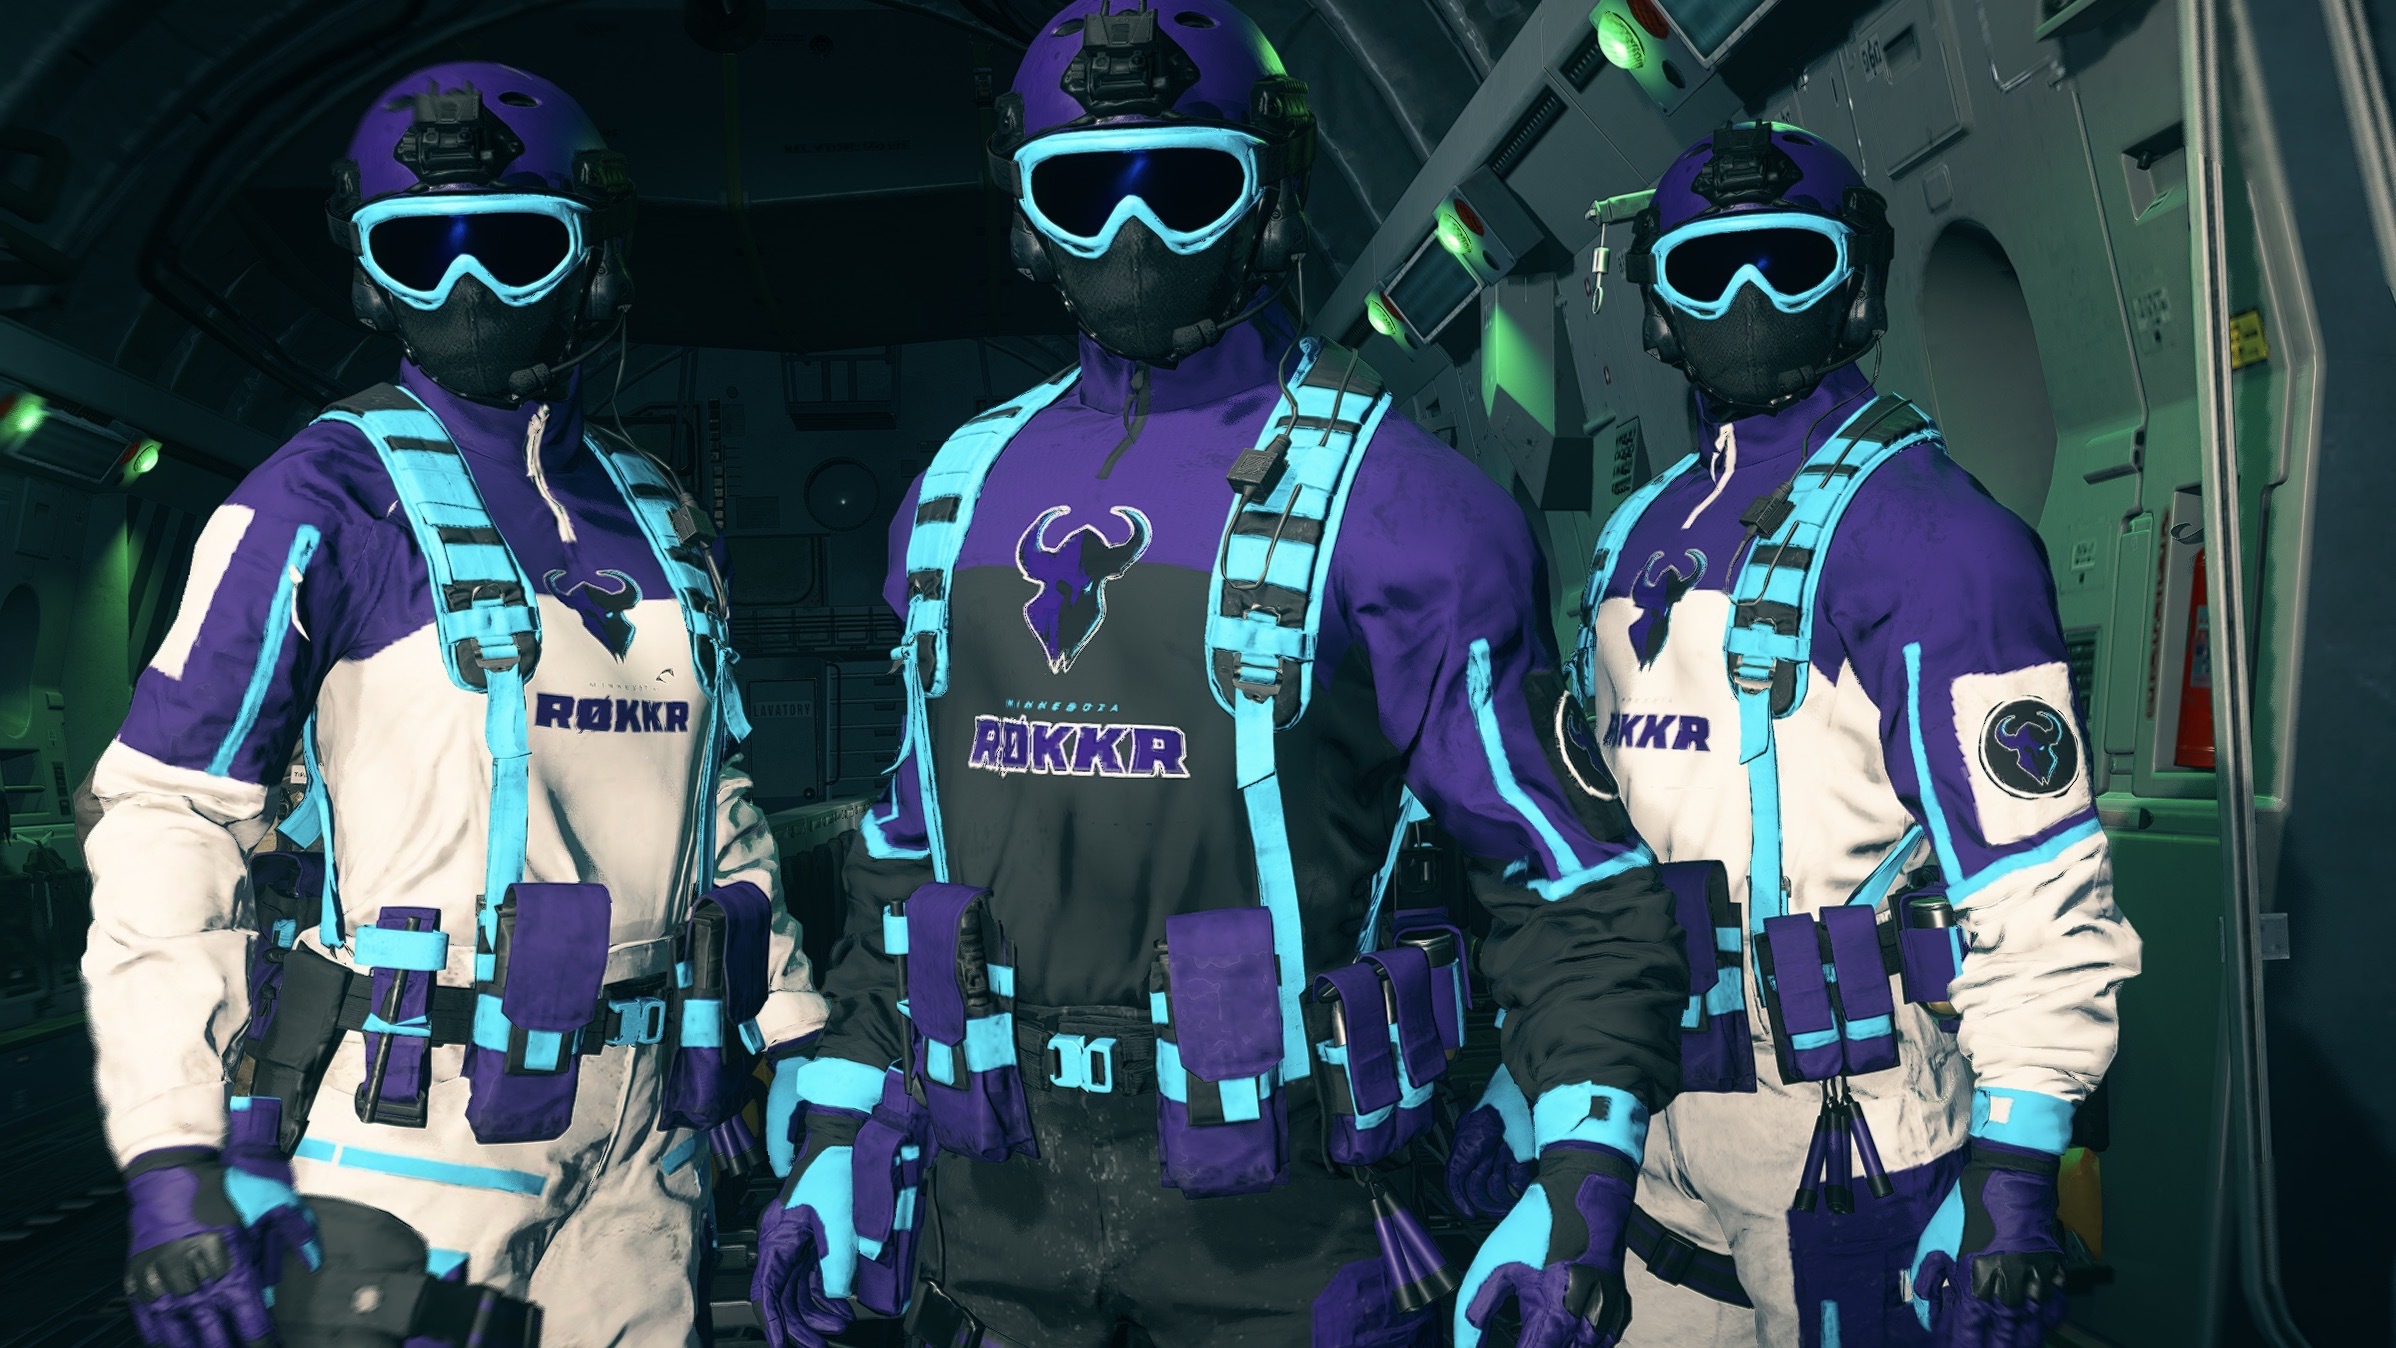 Minnesota Rokkr CDL Team Pack Operator Outfits in MW2.